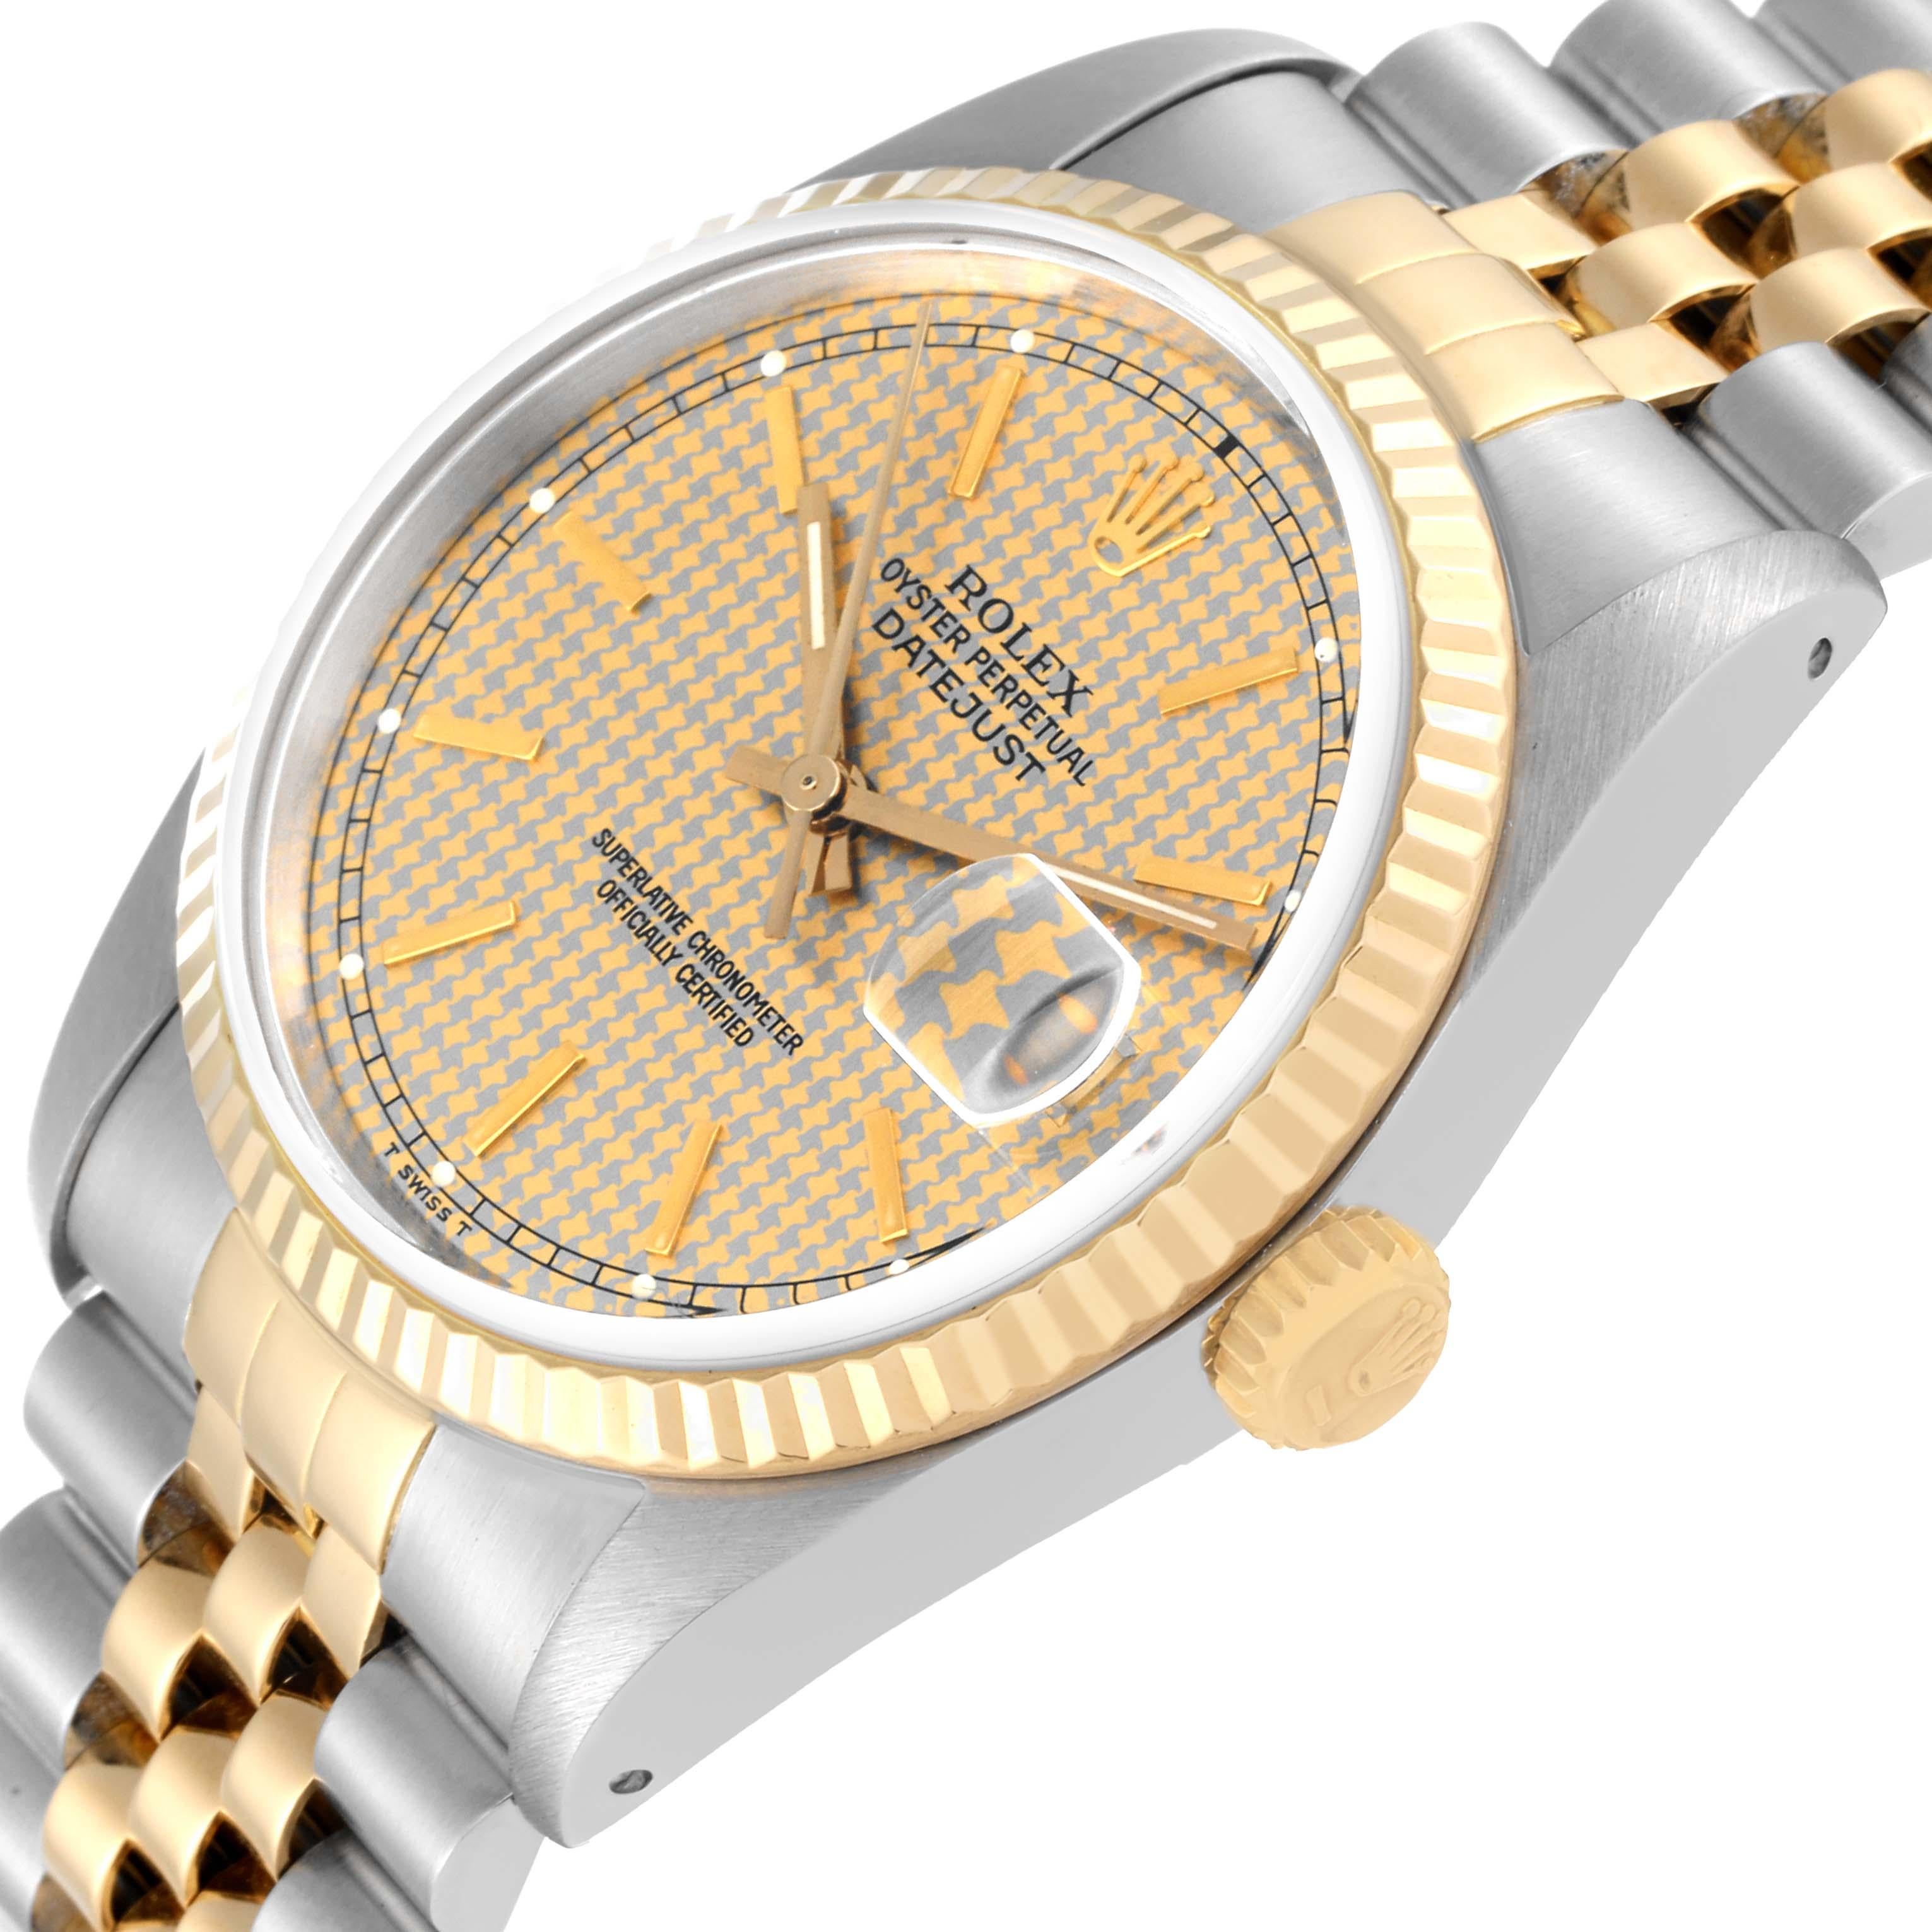 Rolex Datejust Houndstooth Dial Steel Yellow Gold Mens Watch 16233 1